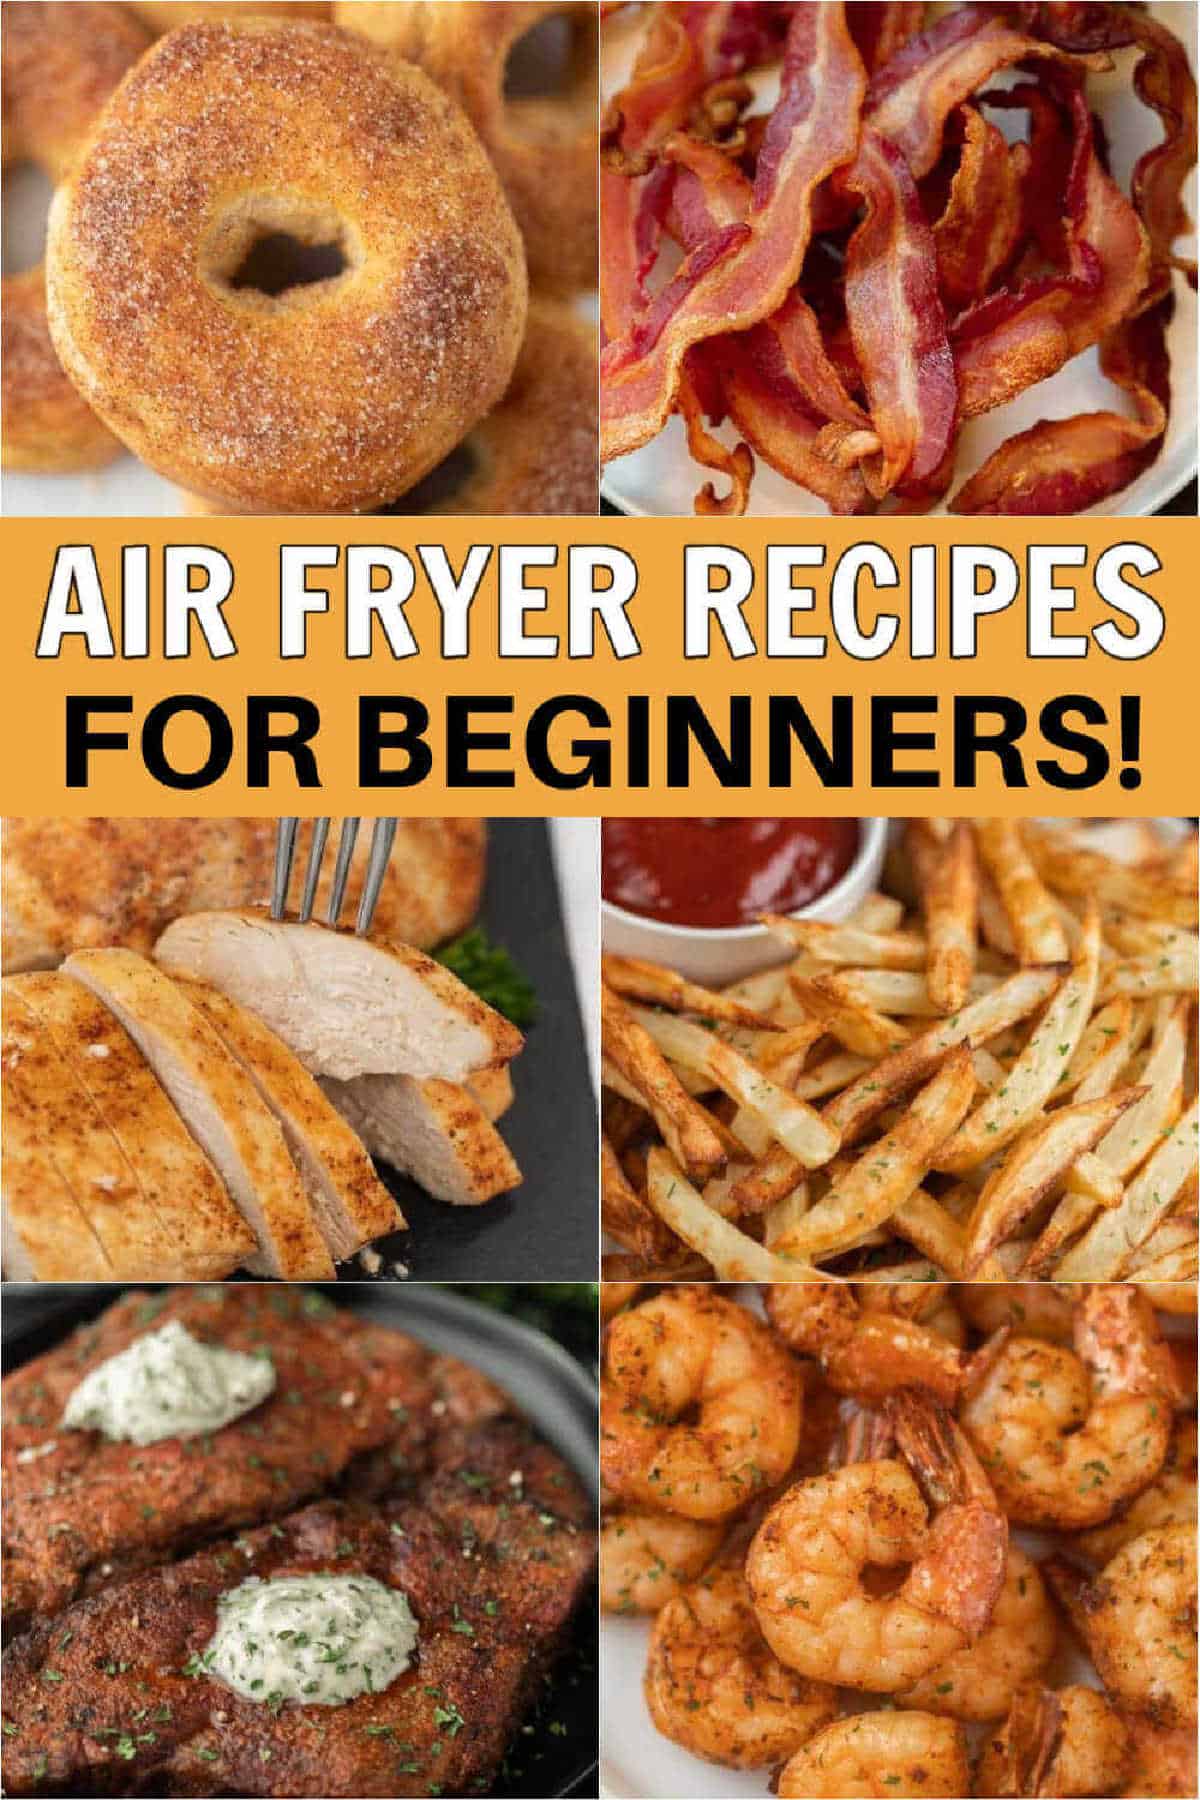 25 EASY Air Fryer Recipes for Beginners (EXPERTS too!)